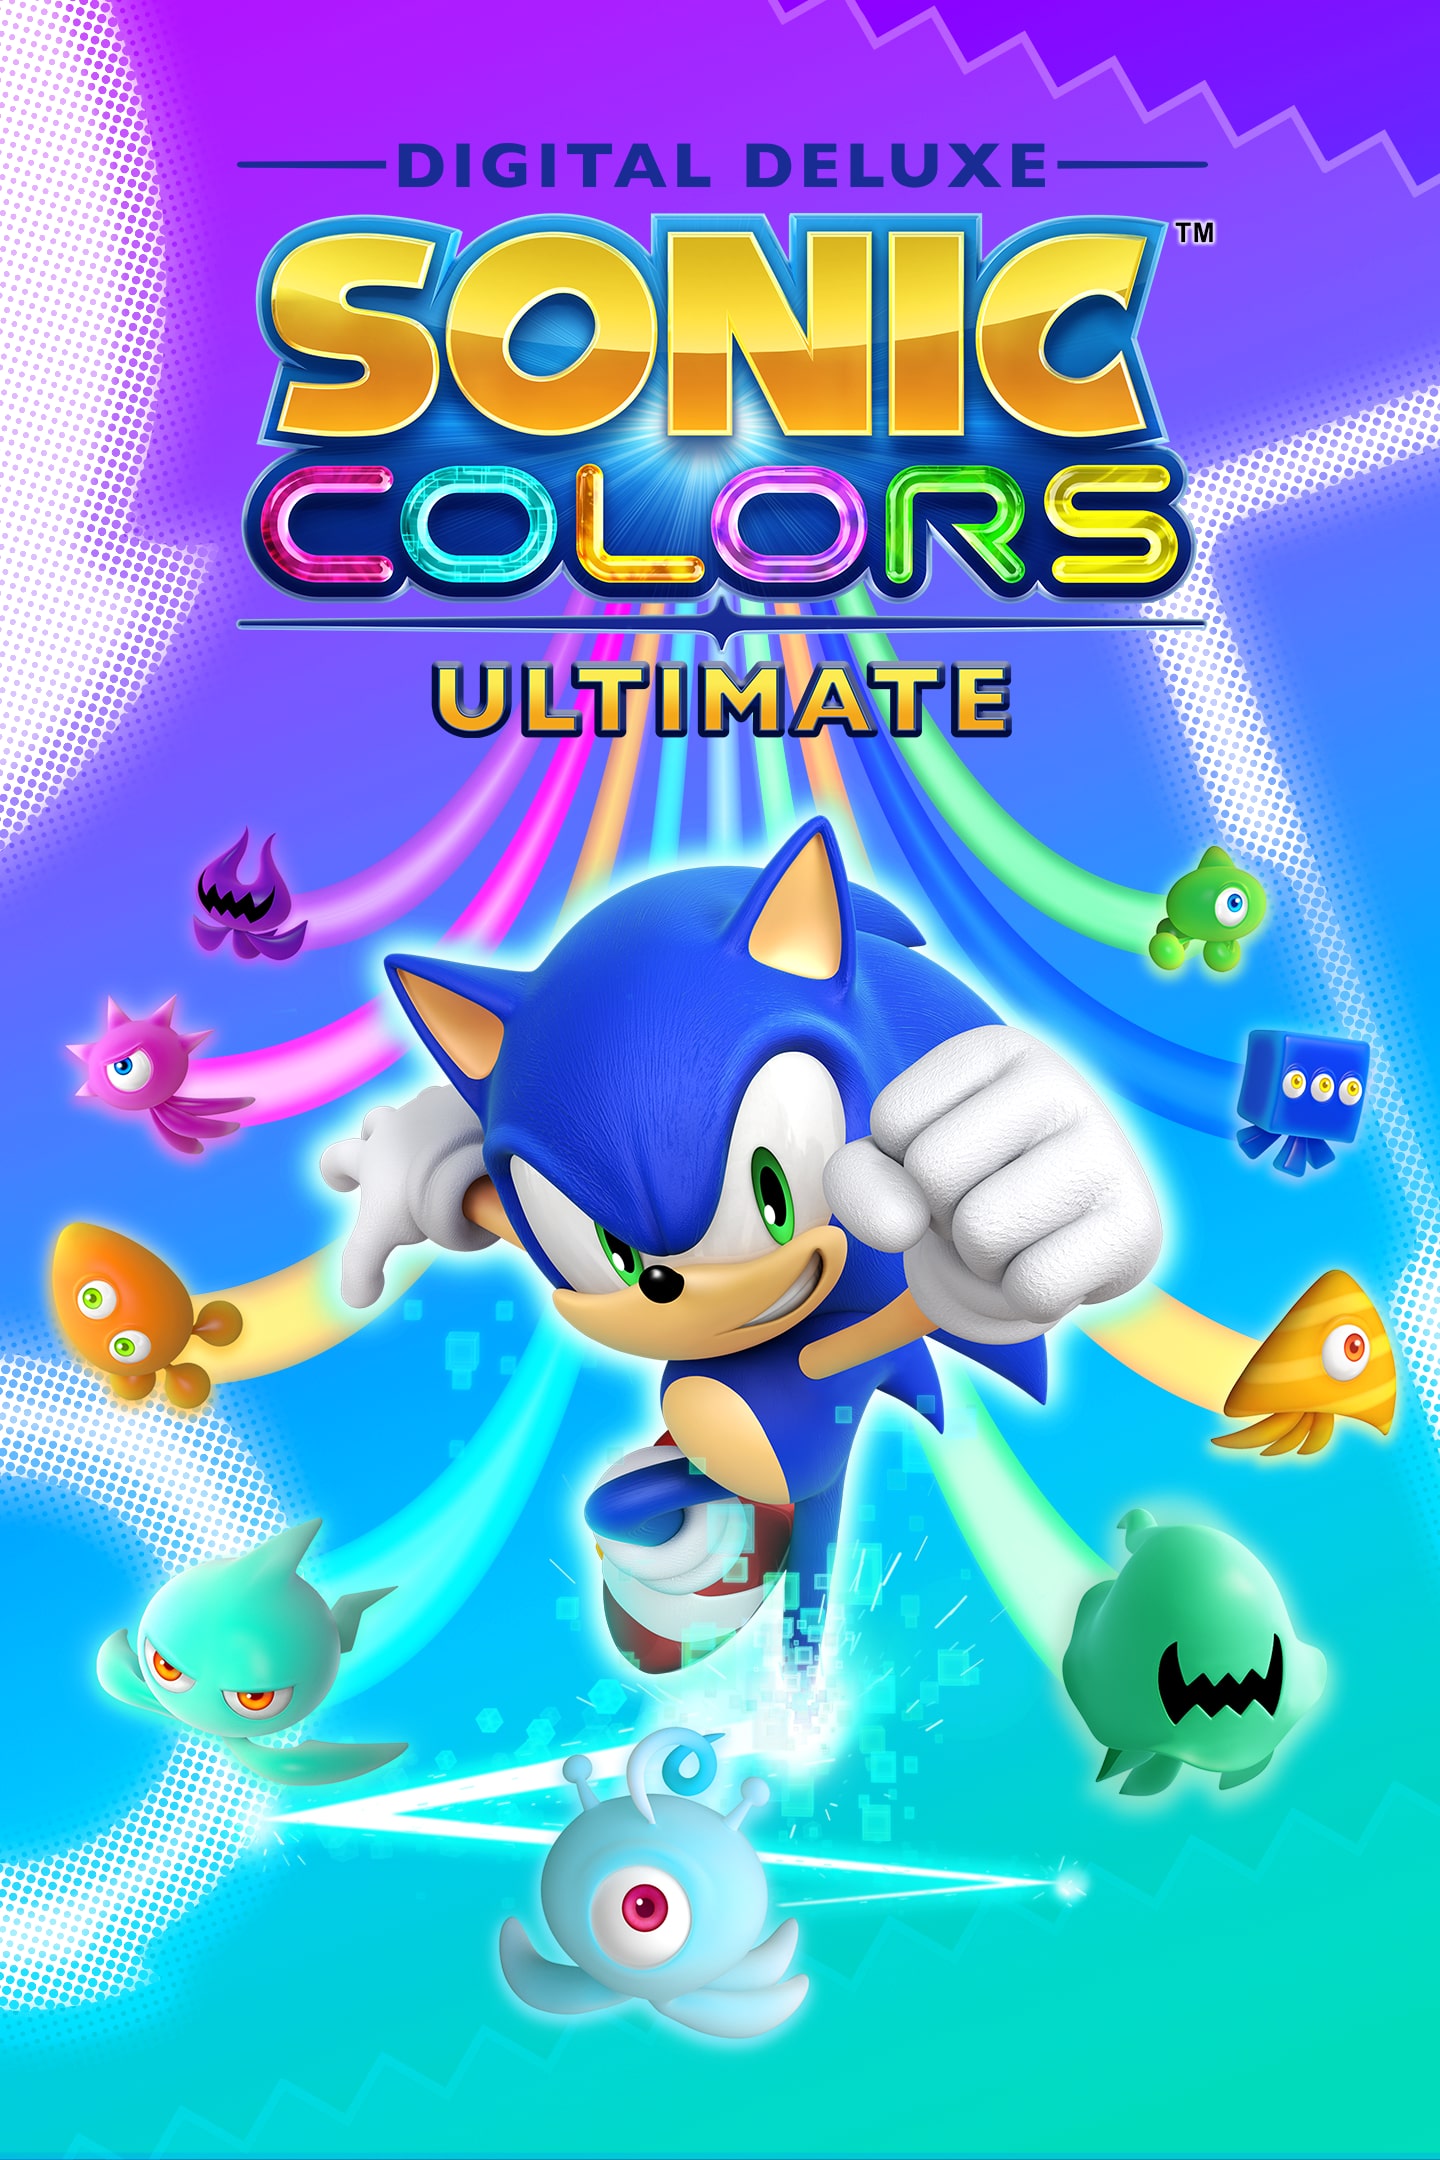 Sonic the Hedgehog on X: One week left until Sonic Colors: Ultimate!  unless you pre-ordered the Digital Deluxe Edition, then 3 days!   / X